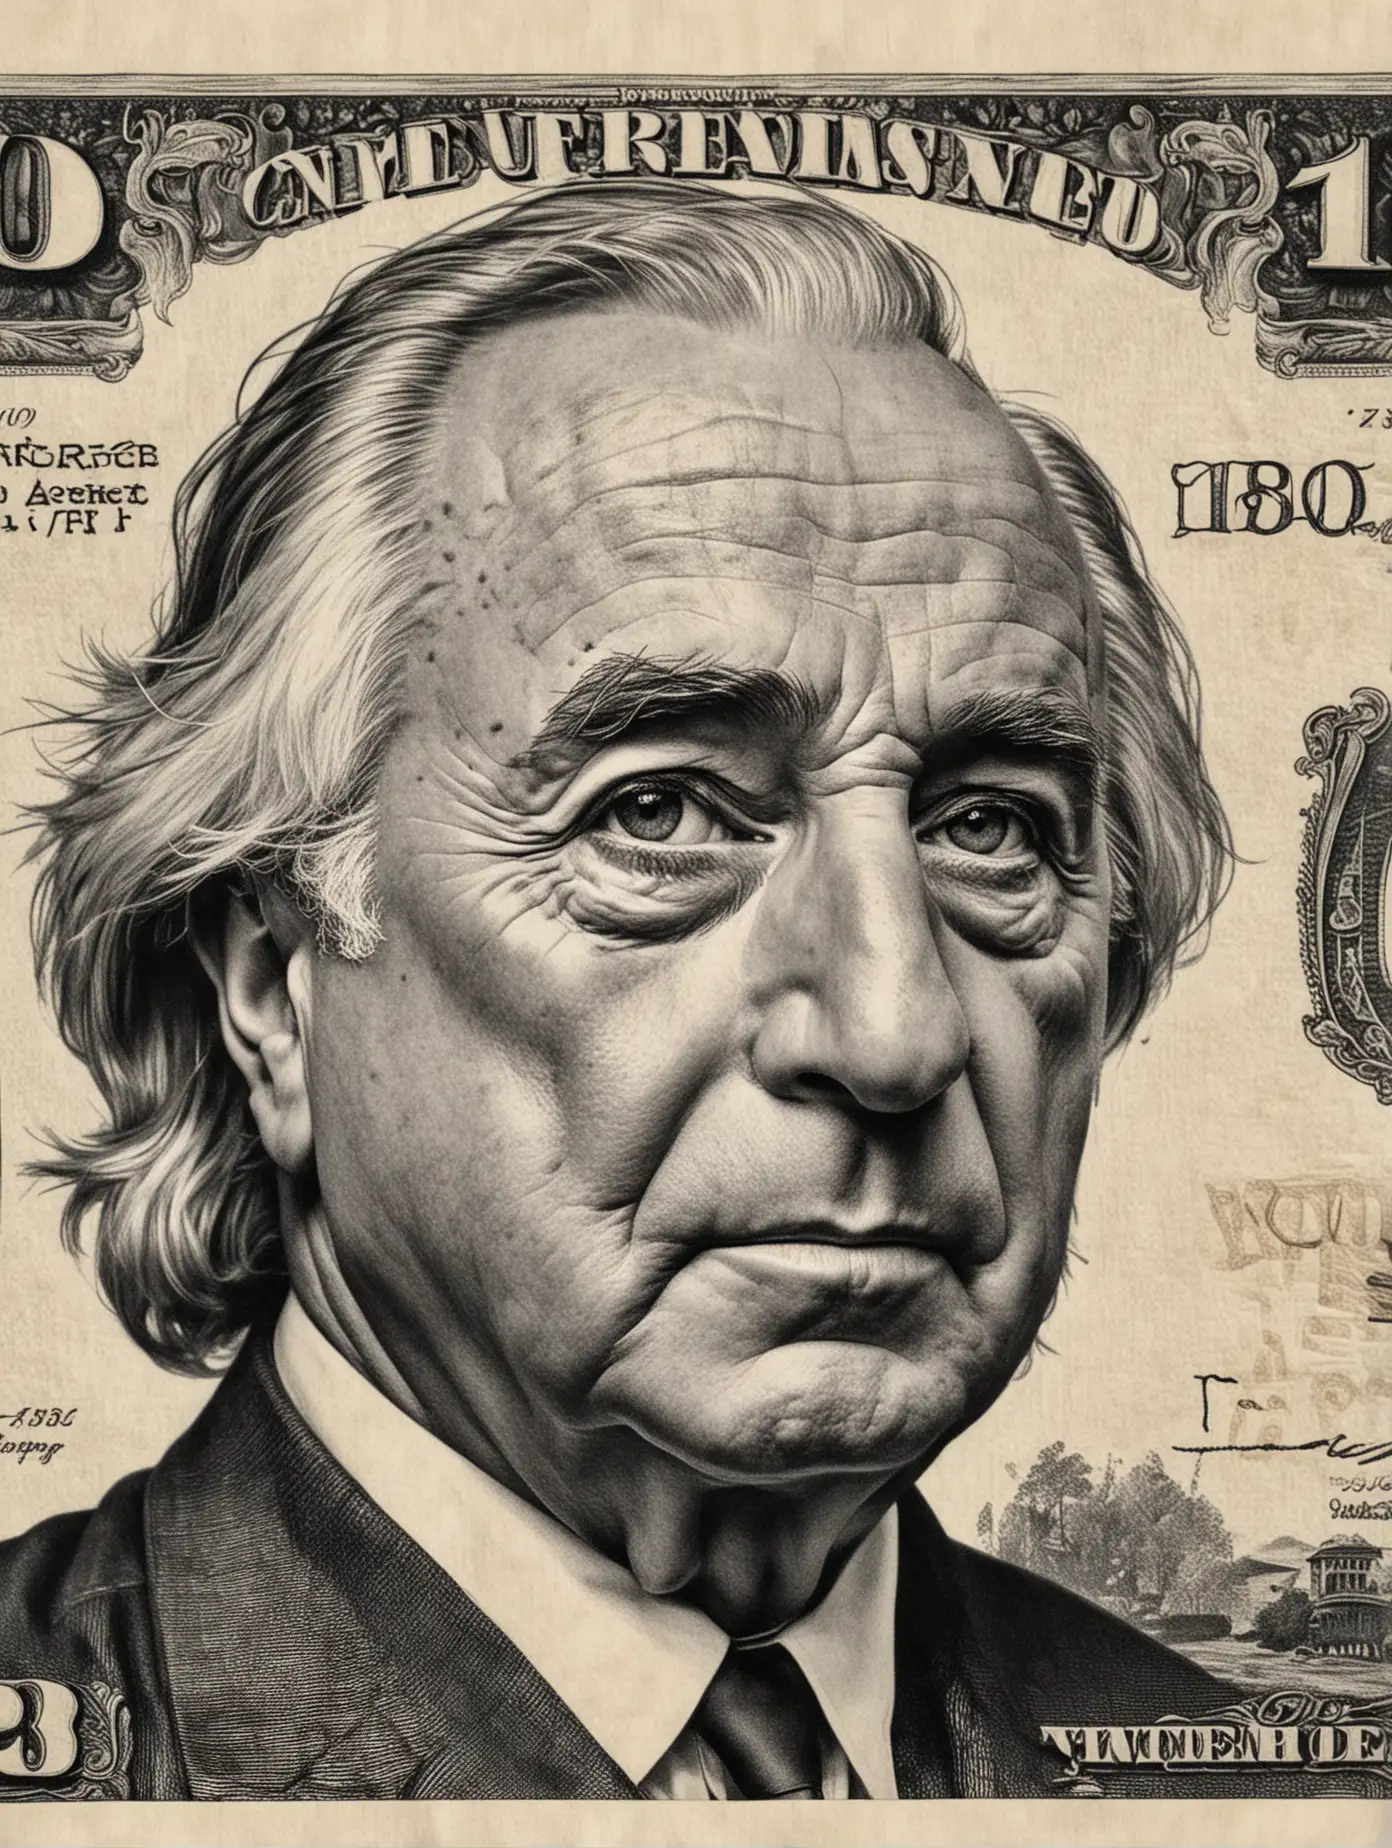  Bernie Madoff Black and white illustration in portrait style on a banknote